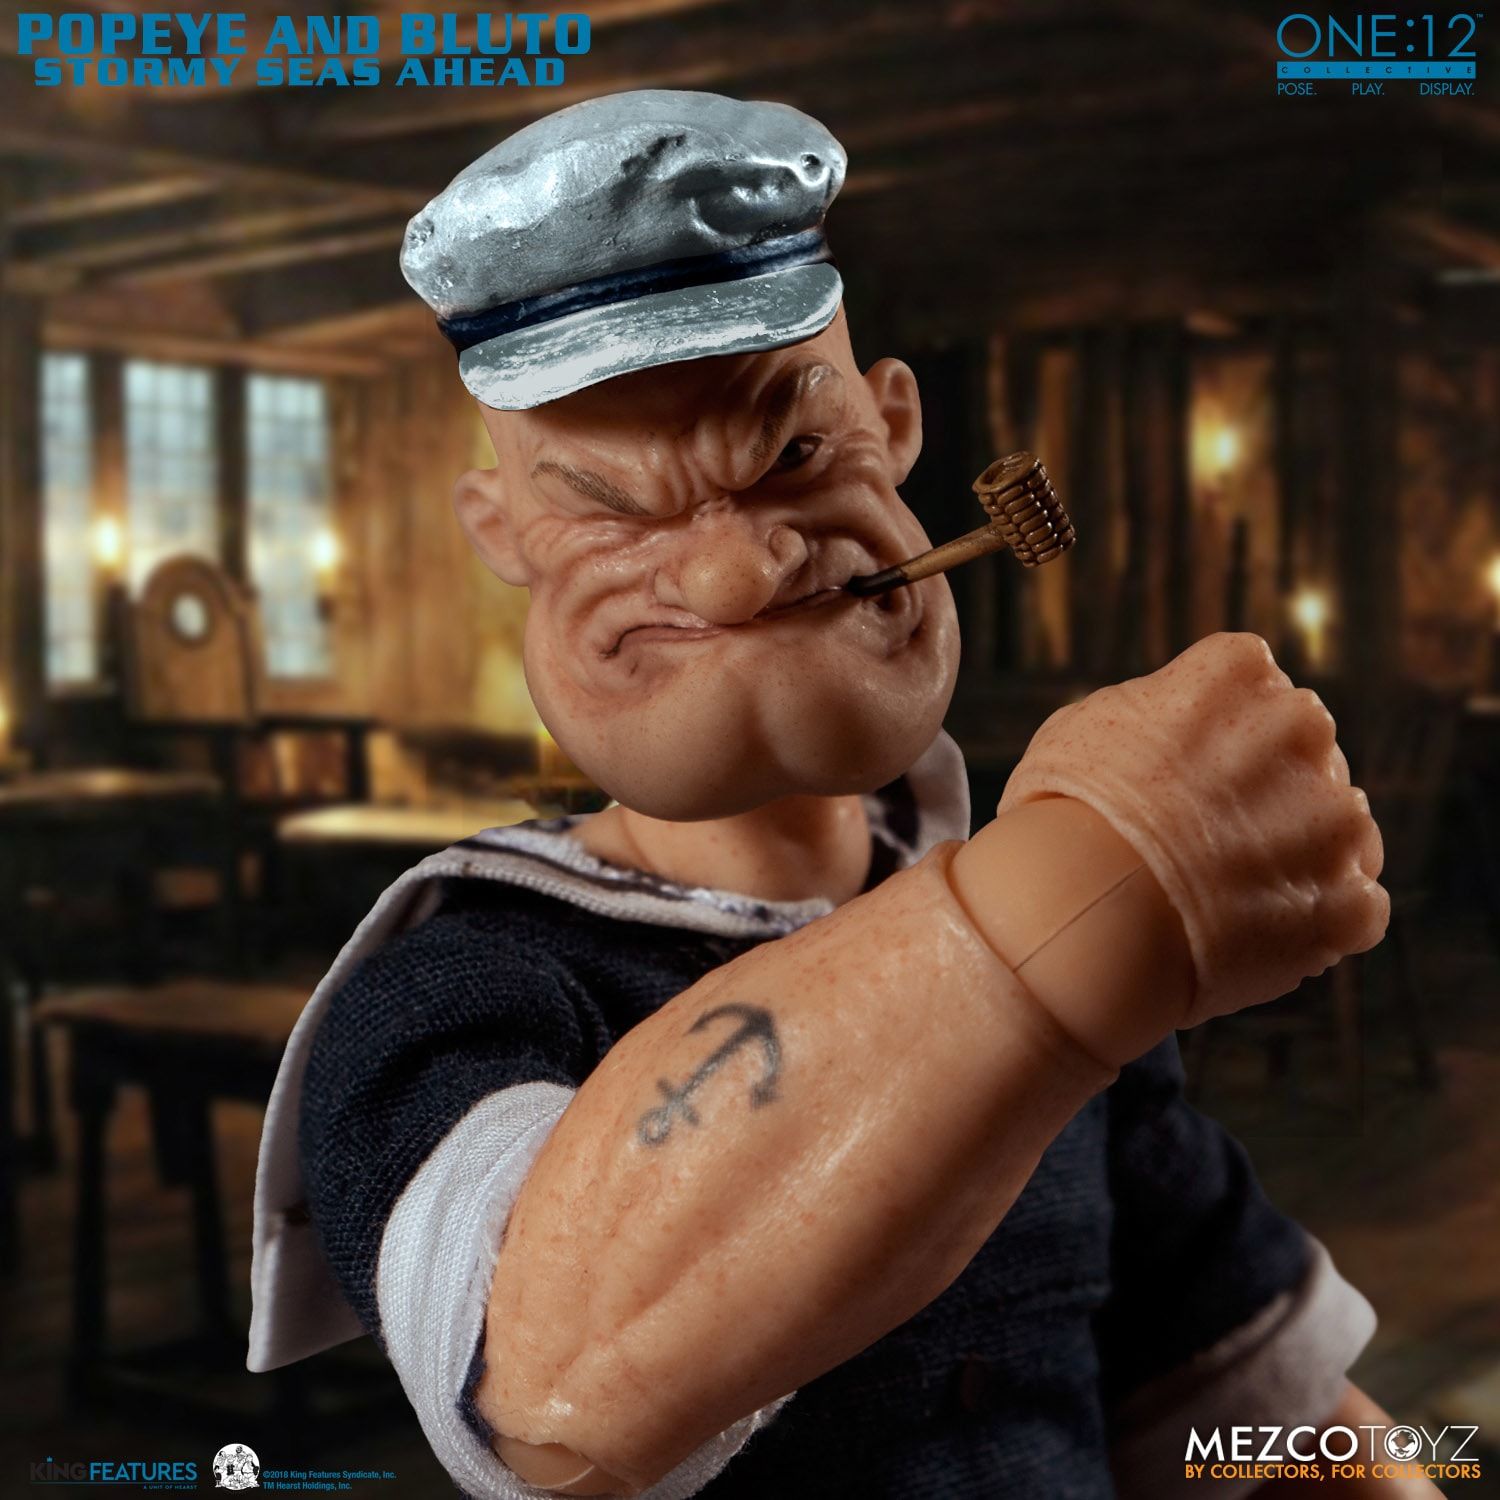 Mezco Toyz 76470 1:12 THE ONE COLLECTIVE Pupai Popeye FIGURE Toys 6'' 